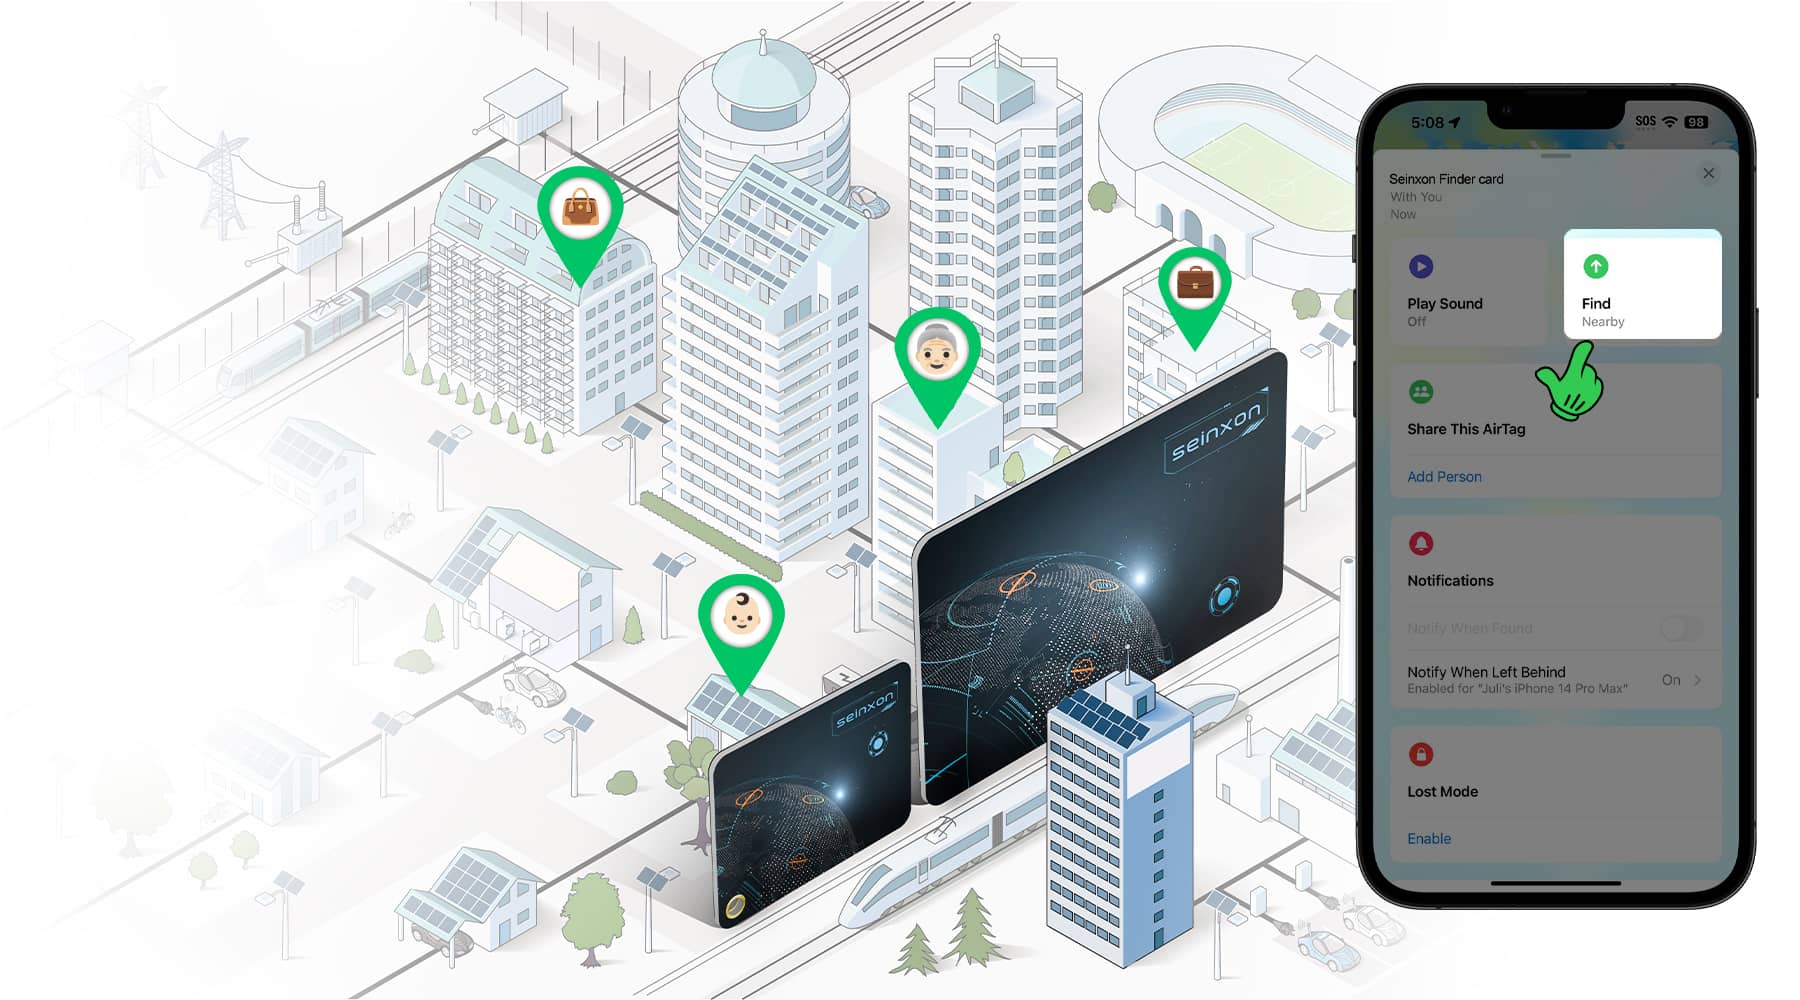 Interactive-city-map-showing-Seinxon-tracker-locations-with-a-smartphone-interface-displaying-the-tracking-app's-'Find-Nearby'-function-showcasing-the-urban-tracking-capabilities-of-Seinxon-devices.jpg__PID:263d96ef-5d66-4133-9fb1-290ec8223e12